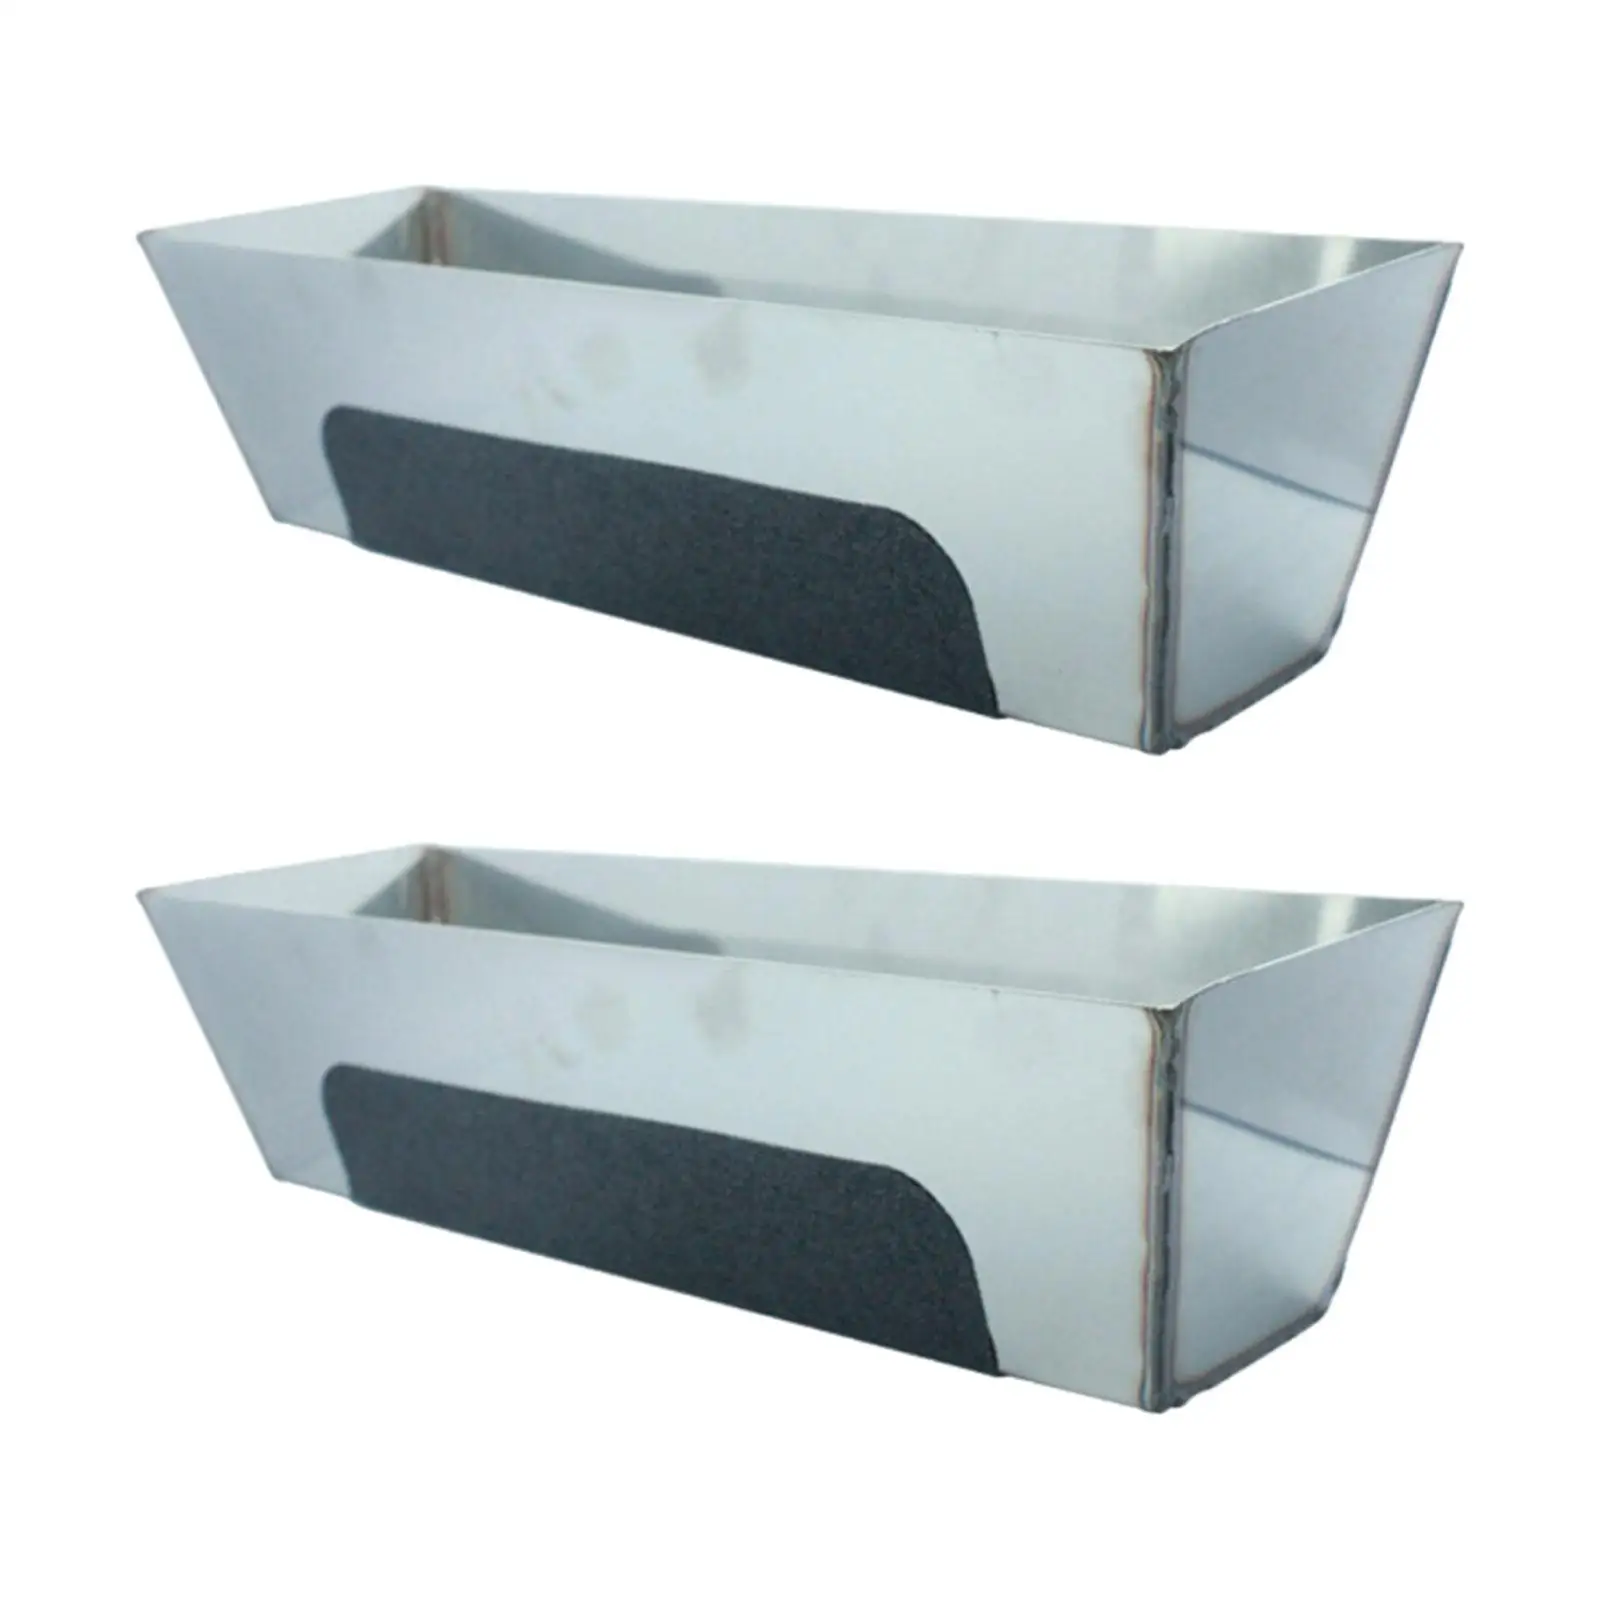 Stainless Steel Mud Pan Sheared Sides Anti Slip Heavy Duty Sturdy Accessories